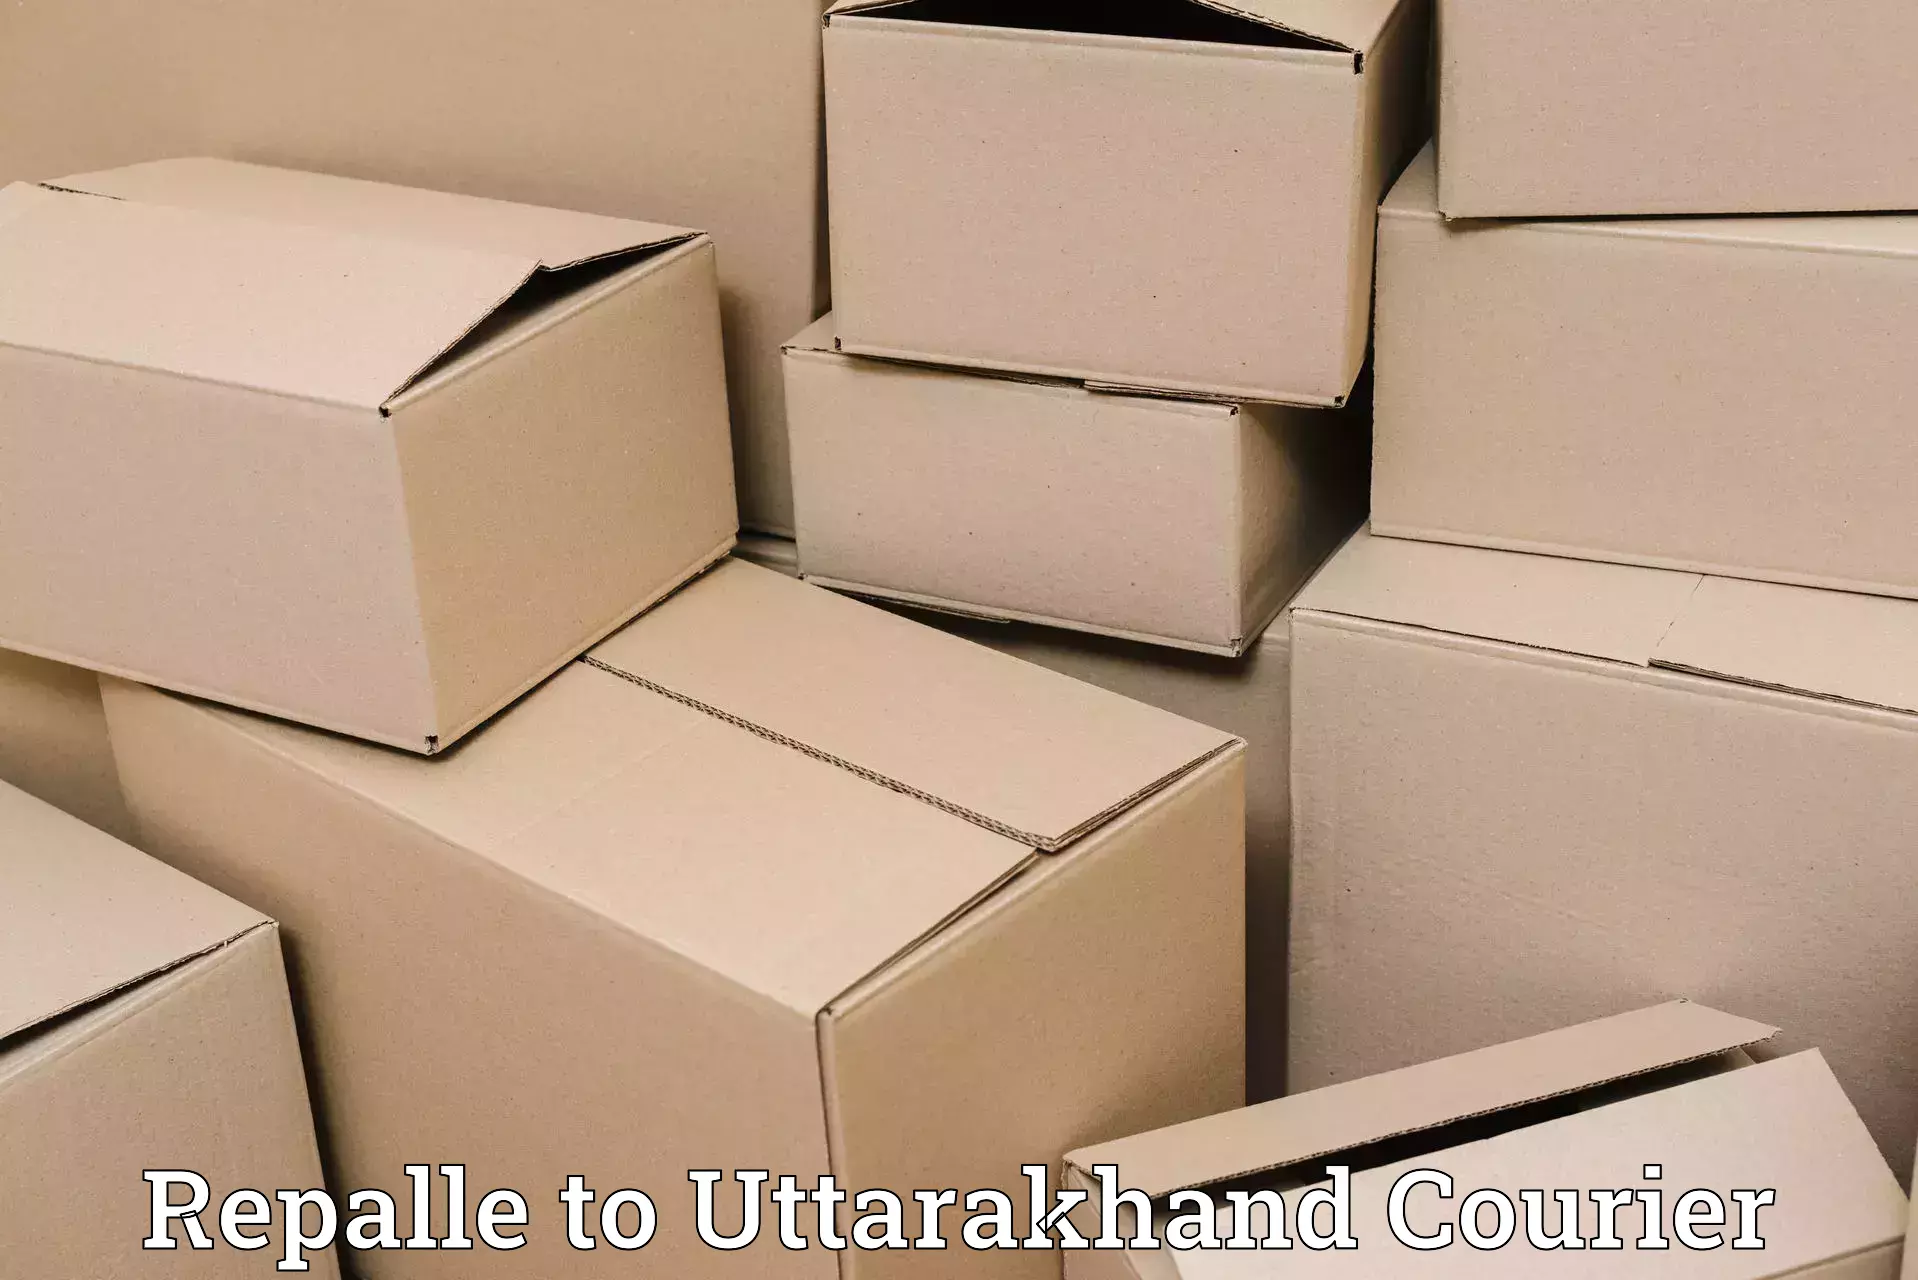 Baggage shipping quotes Repalle to Uttarakhand